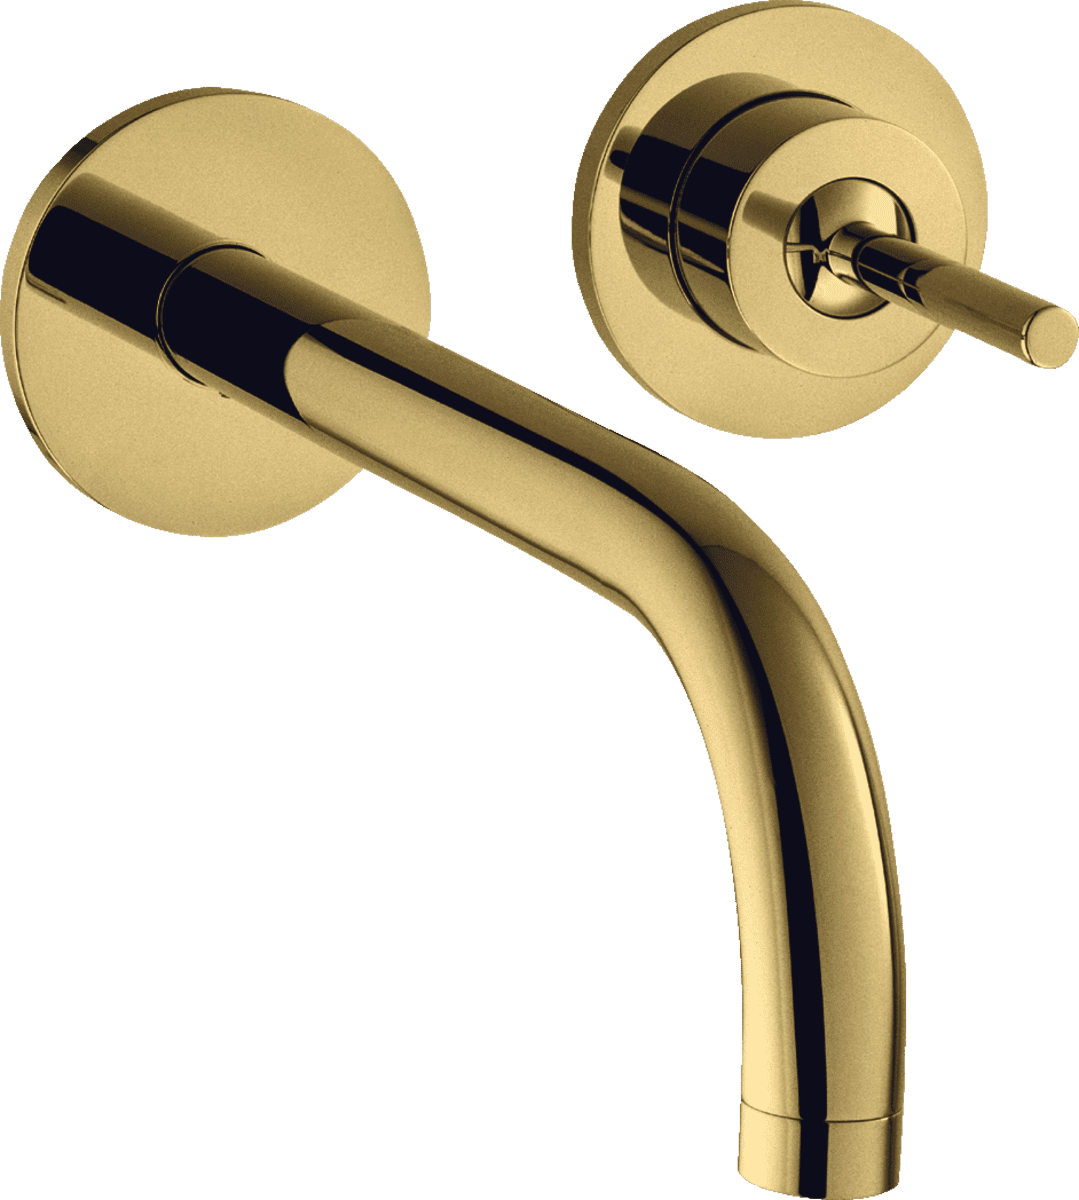 Picture of HANSGROHE AXOR Uno Single lever basin mixer for concealed installation wall-mounted with spout 225 mm and escutcheons #38116990 - Polished Gold Optic